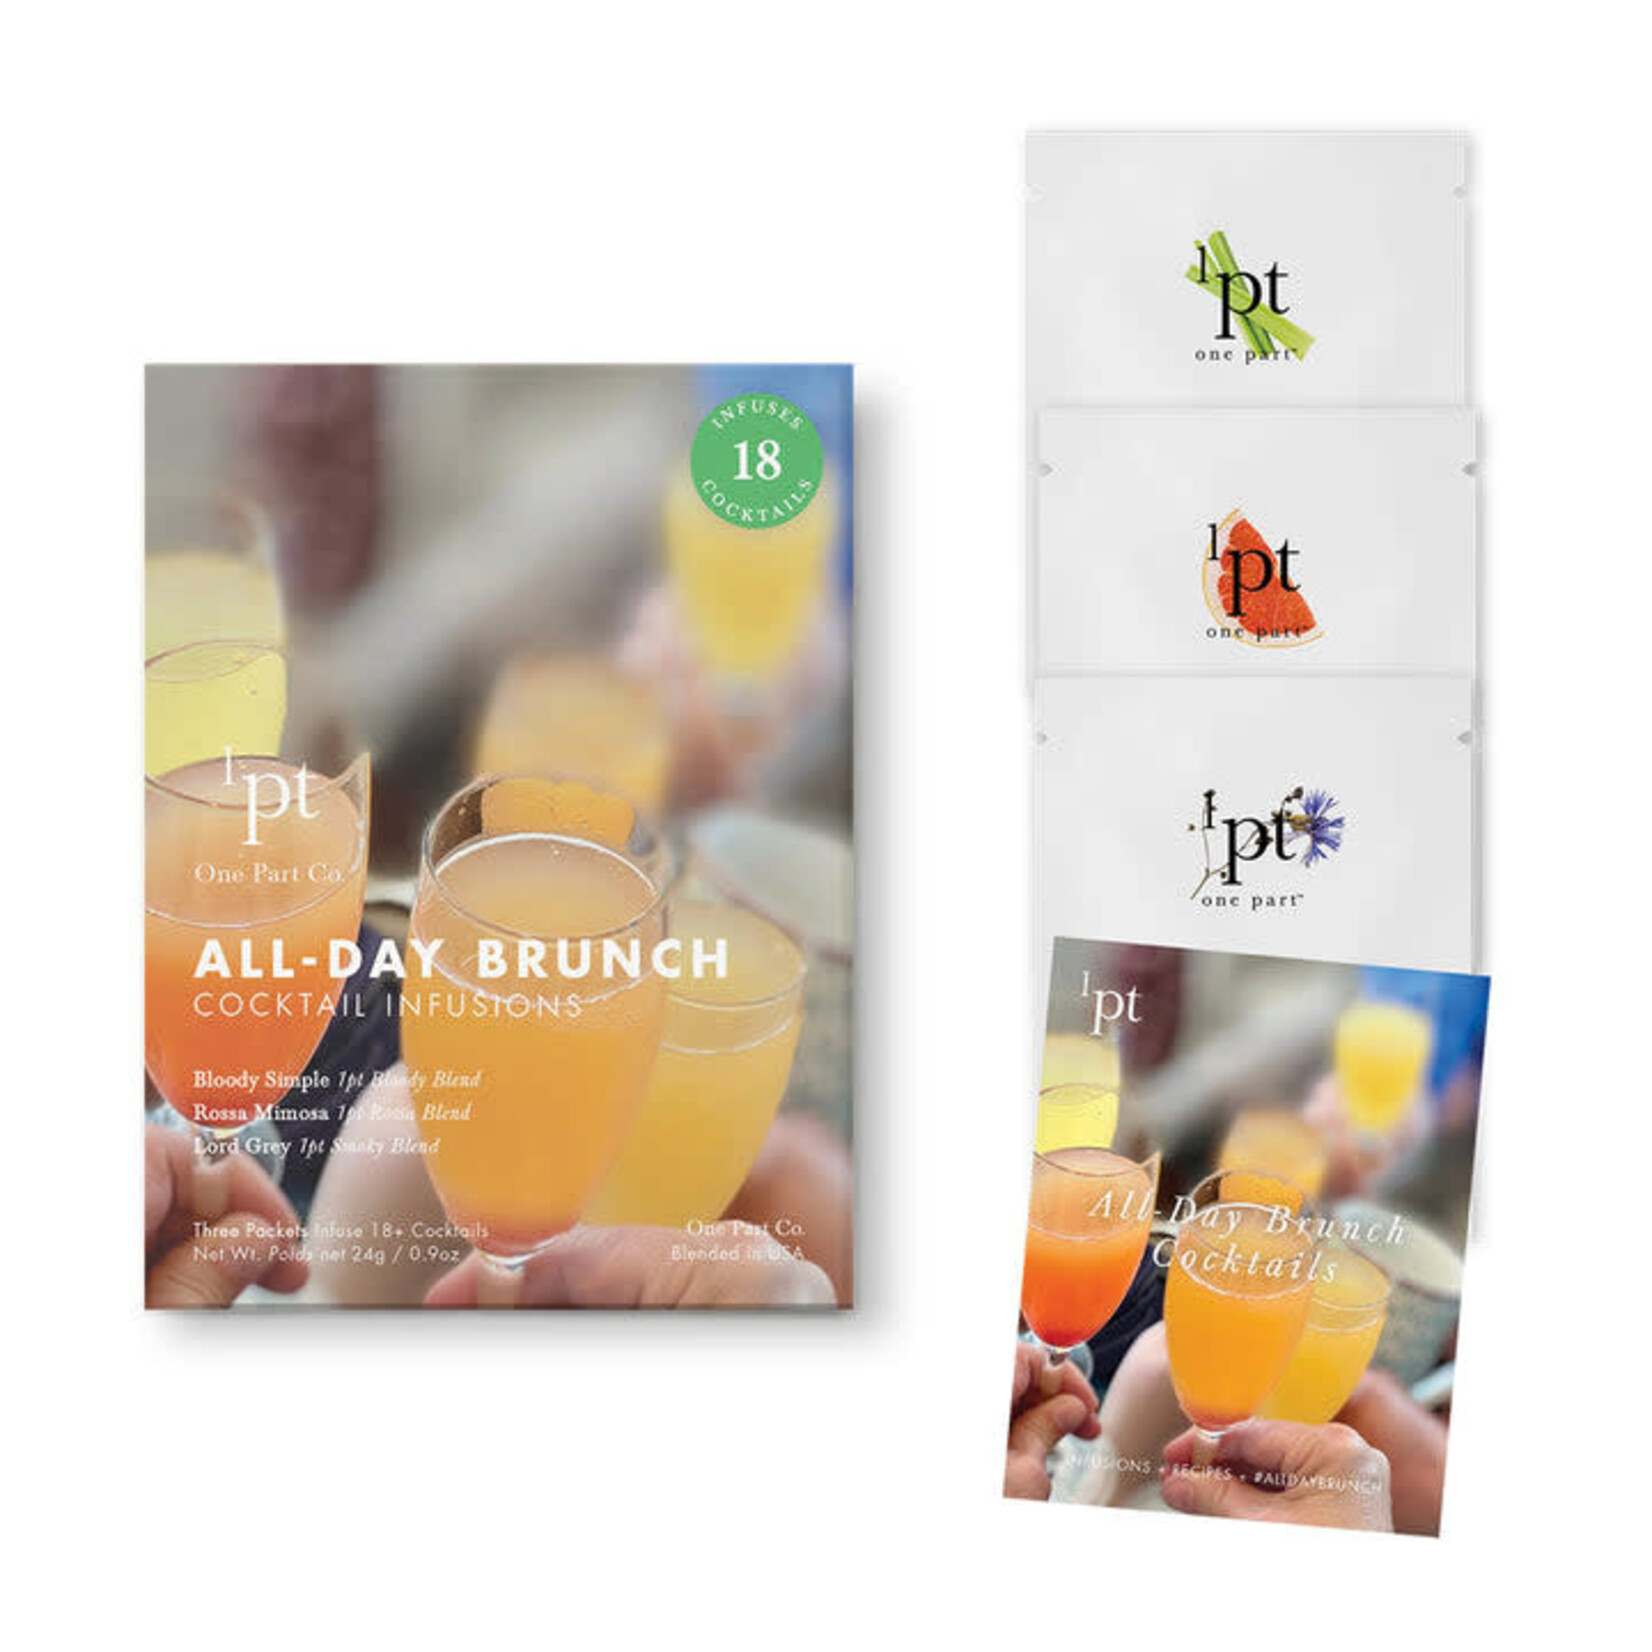 1PT Occasion Pack - All-Day Brunch